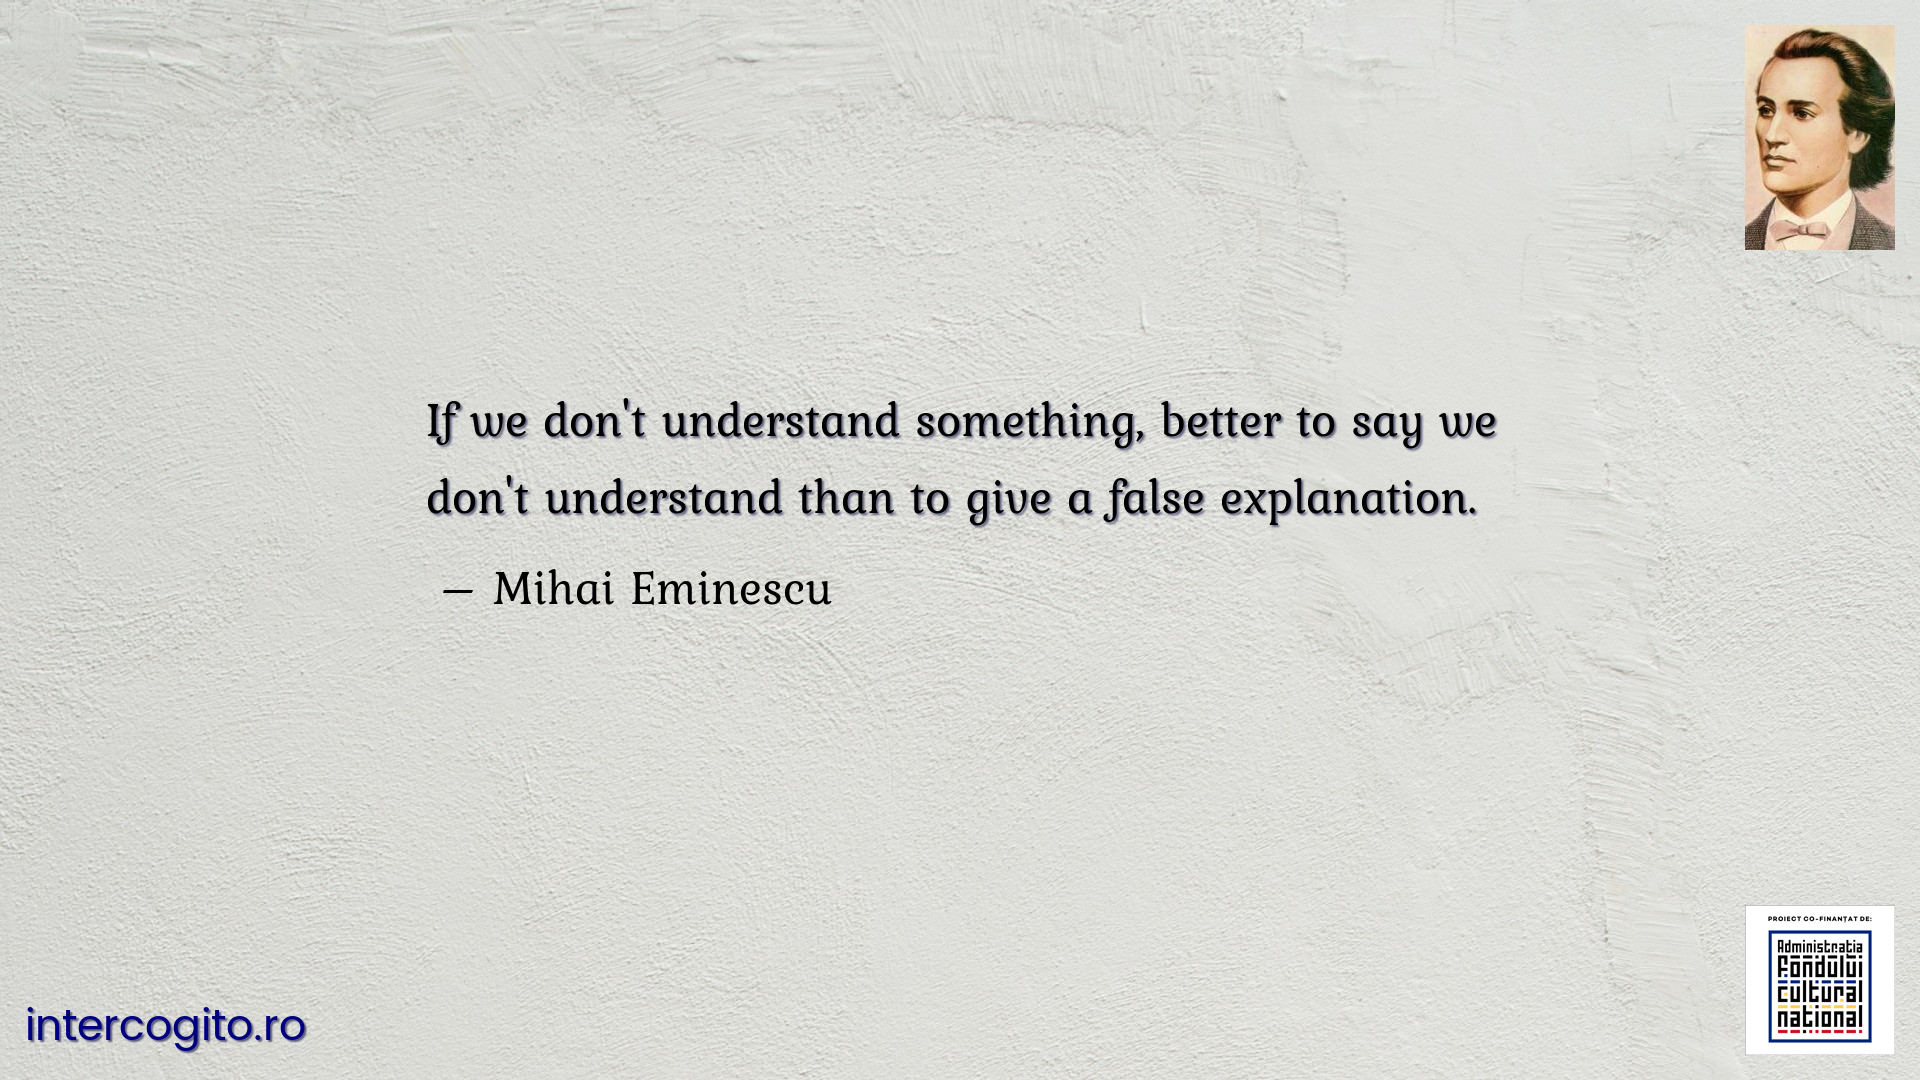 If we don't understand something, better to say we don't understand than to give a false explanation.